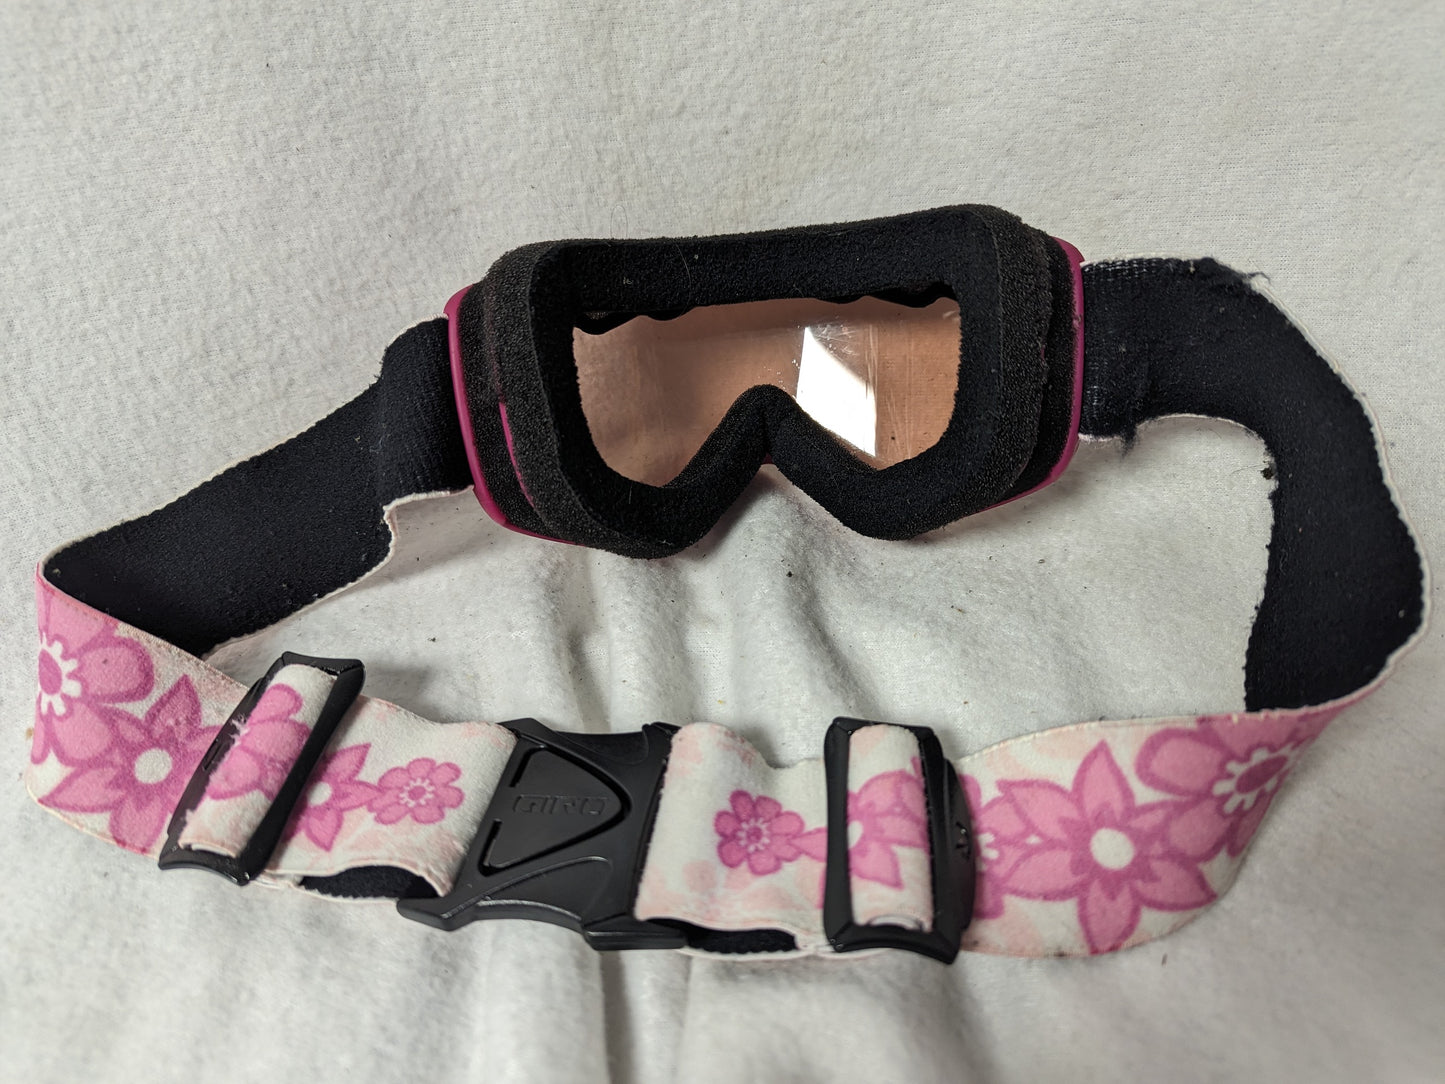 Giro Youth Ski/Snowboard Goggles Size Youth Color Pink Condition Used